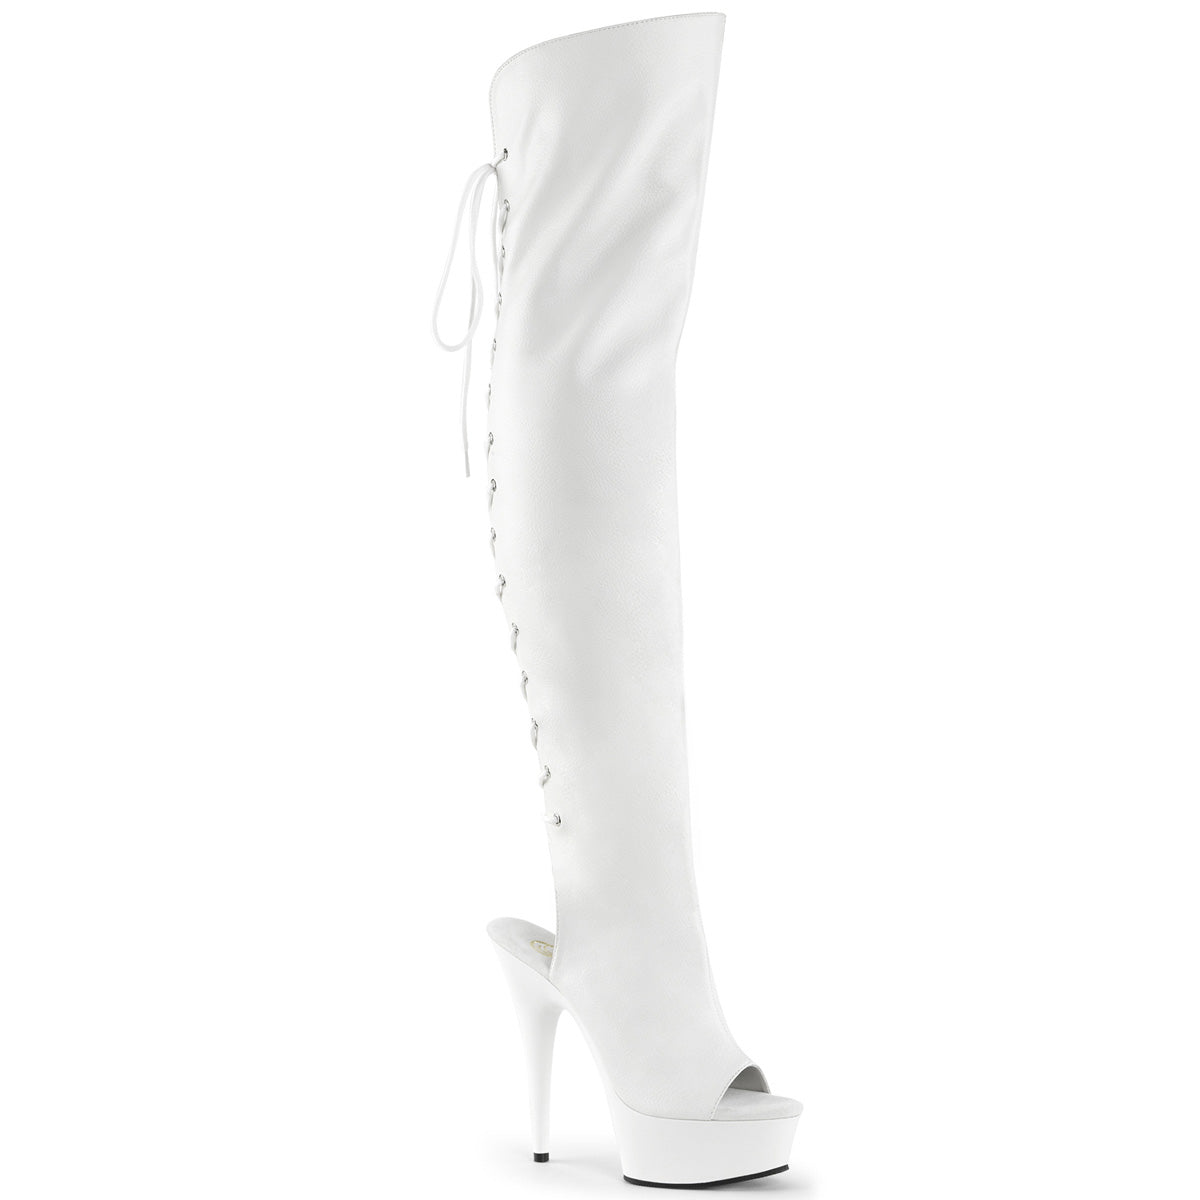 DELIGHT-3019 Thigh High Boots